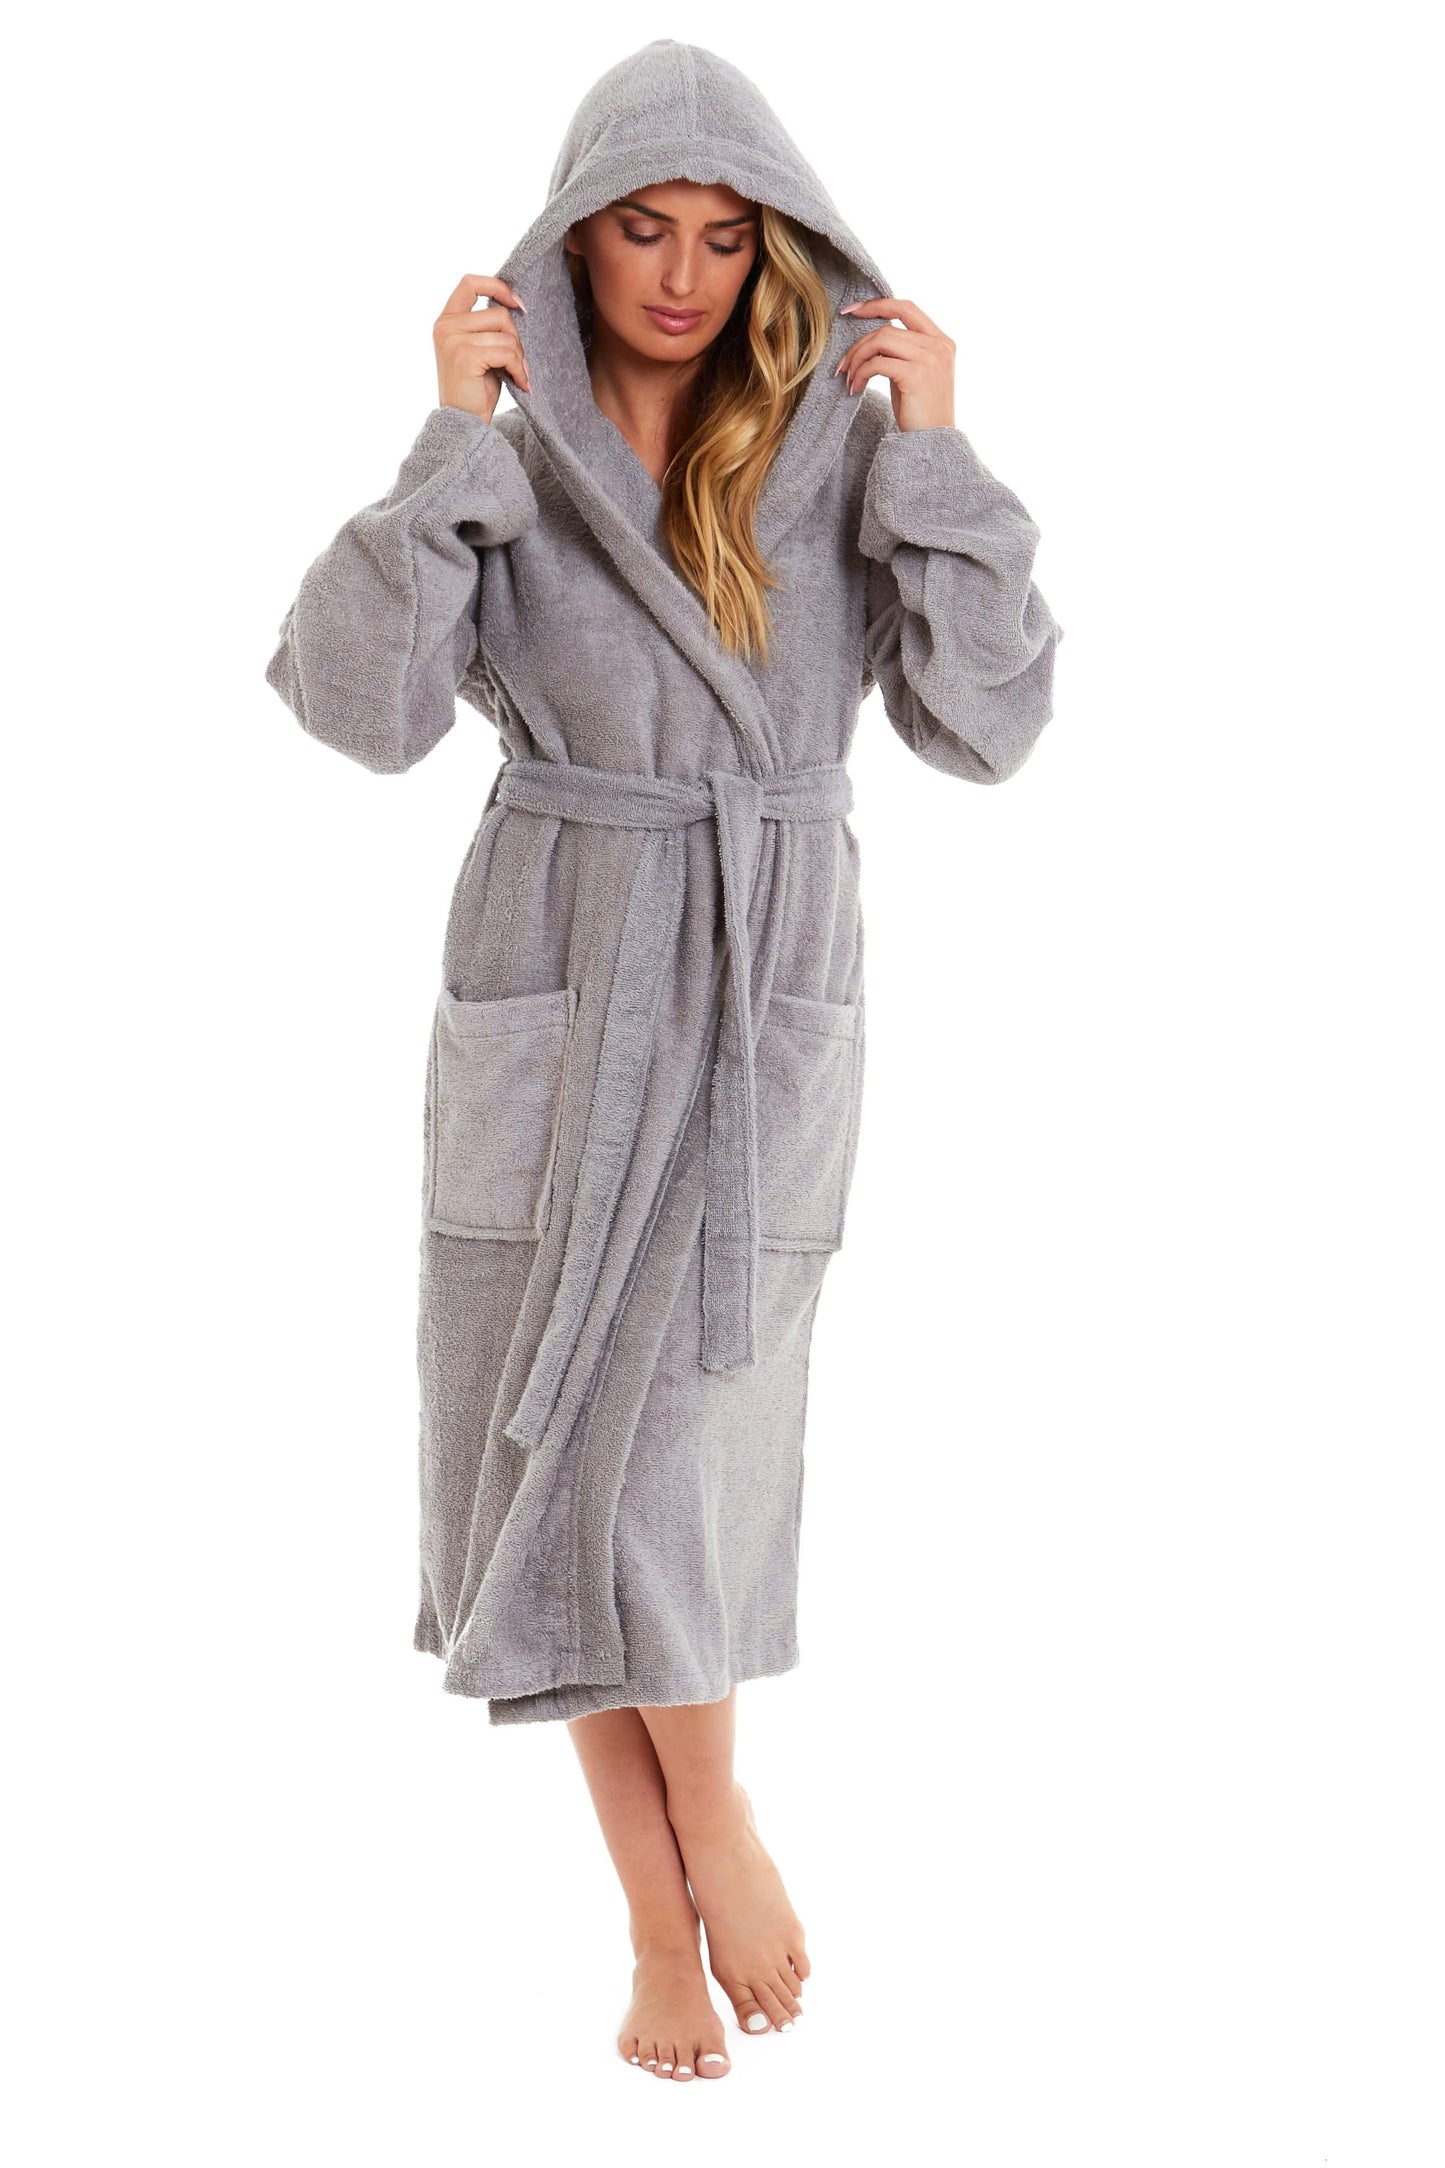 Ladies Luxury Bamboo Hooded Towelling Robe SMALL | UK 8-10 / GREY Daisy Dreamer Dressing Gown